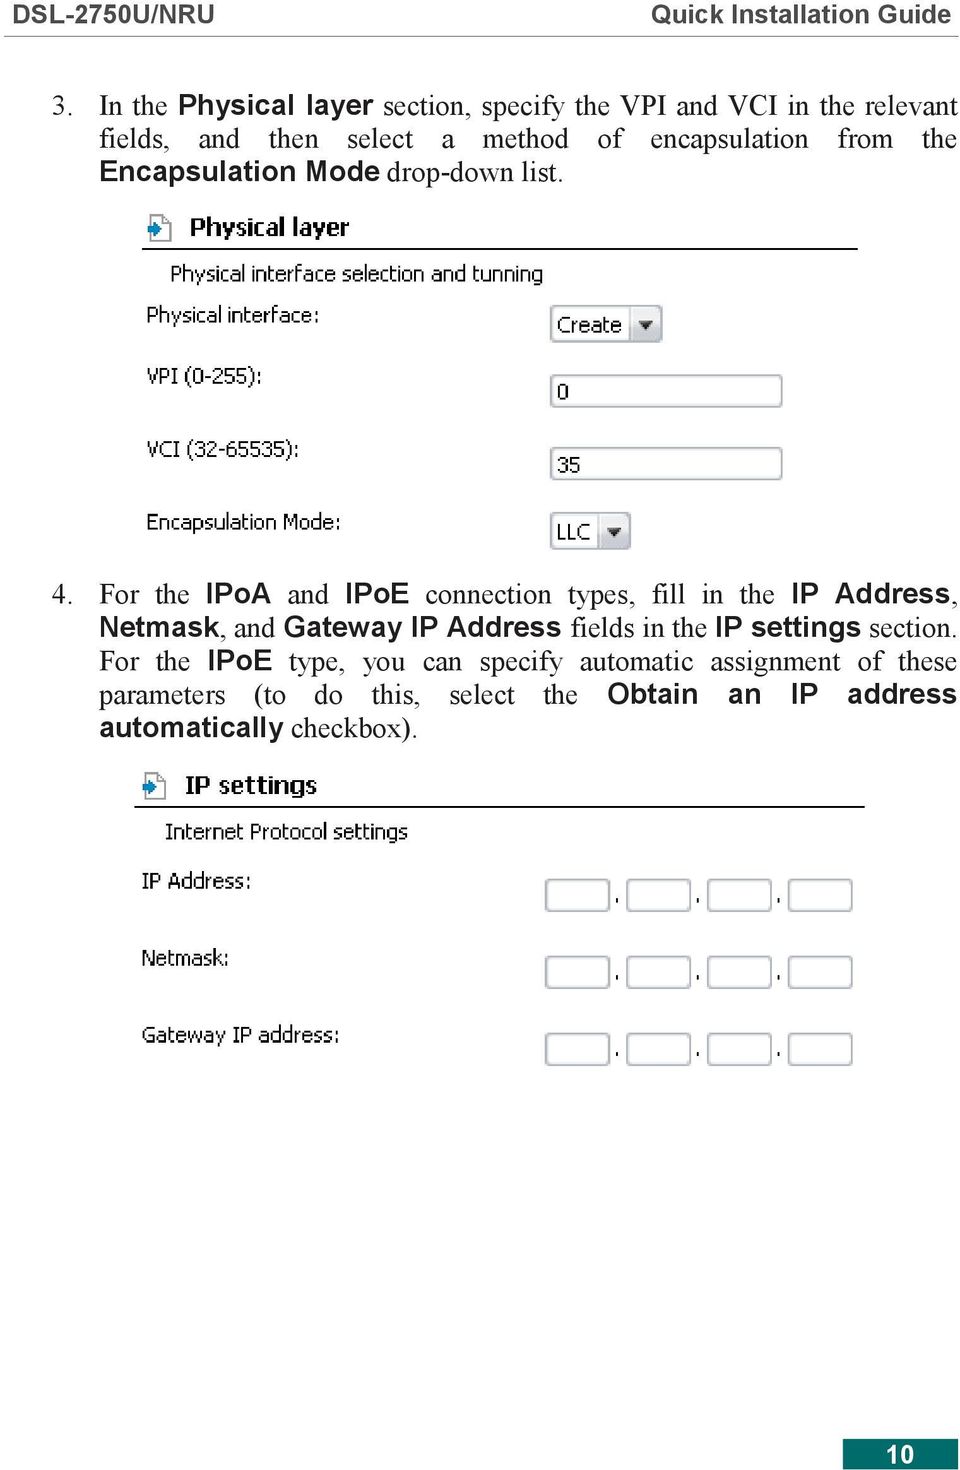 For the IPoA and IPoE connection types, fill in the IP Address, Netmask, and Gateway IP Address fields in the IP